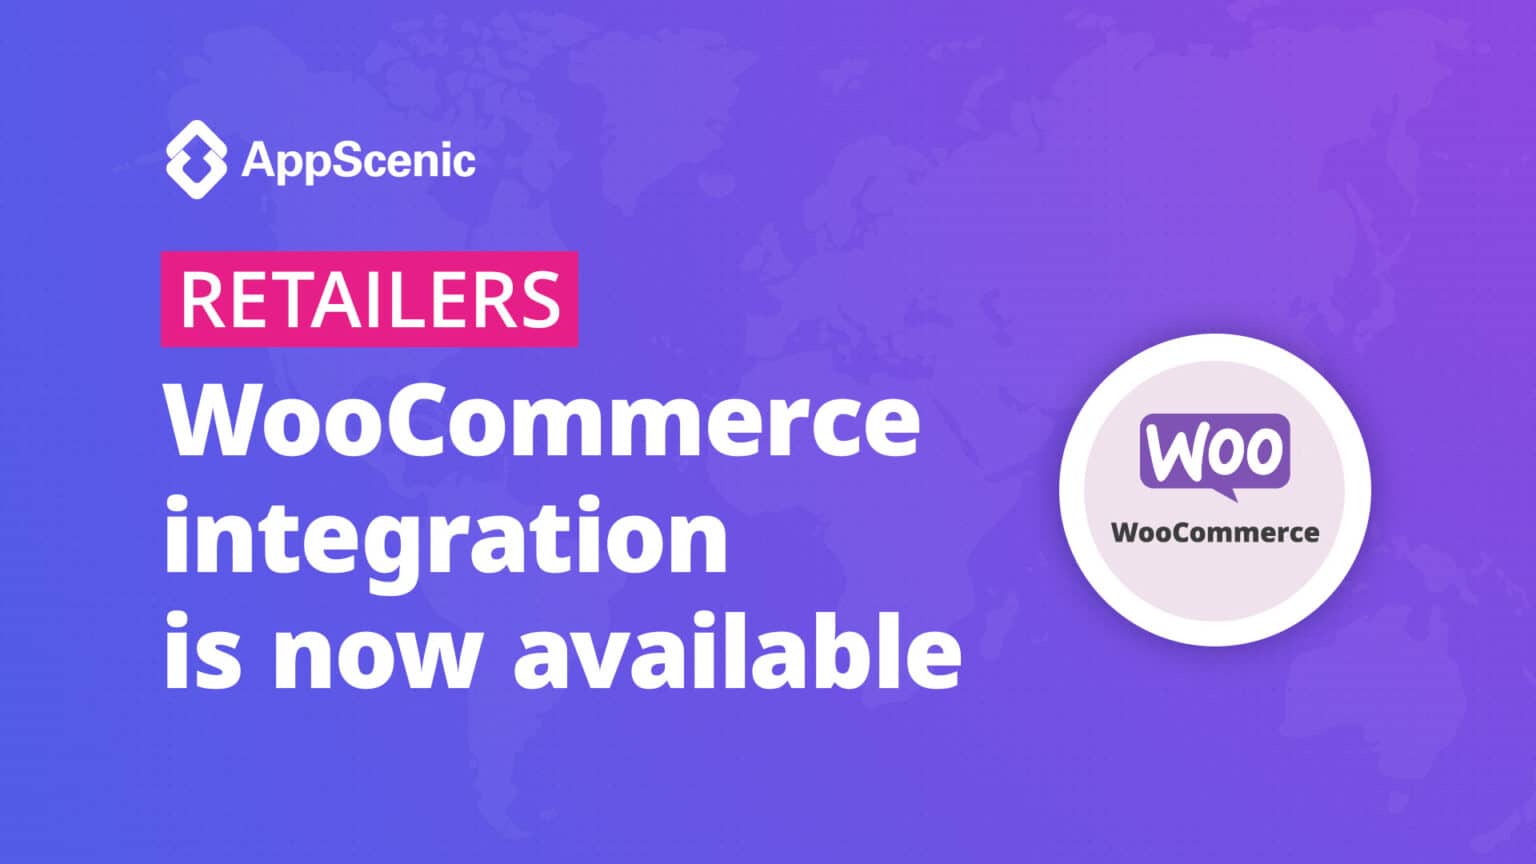 AppScenic WooCommerce integration now available for retailers -  